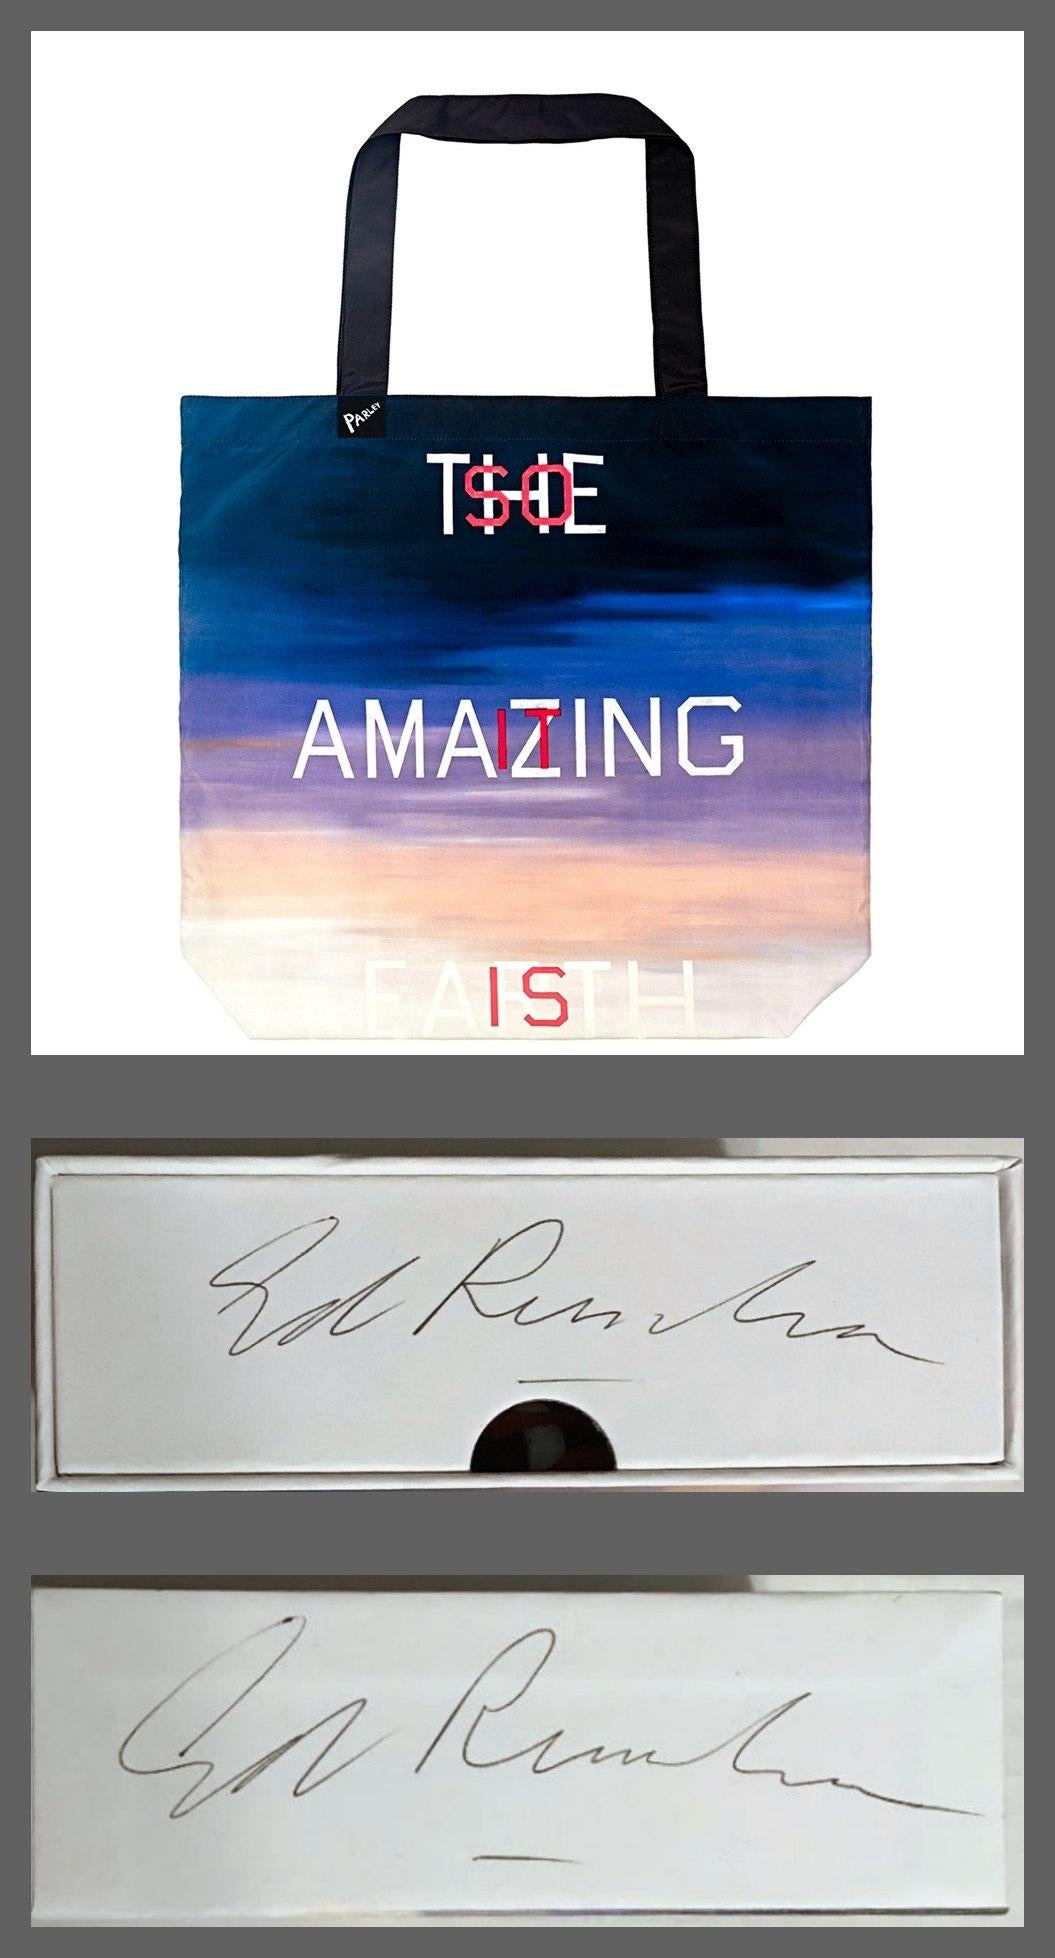 Ed Ruscha
The Amazing Earth, in gift box hand signed twice by Ed Ruscha, ca. 2017
Re-usable ocean bag created from 5 intercepted plastic bottles. In presentation box, uniquely hand signed twice (2x) by Ed Ruscha
Hand signed by Ed Ruscha in his